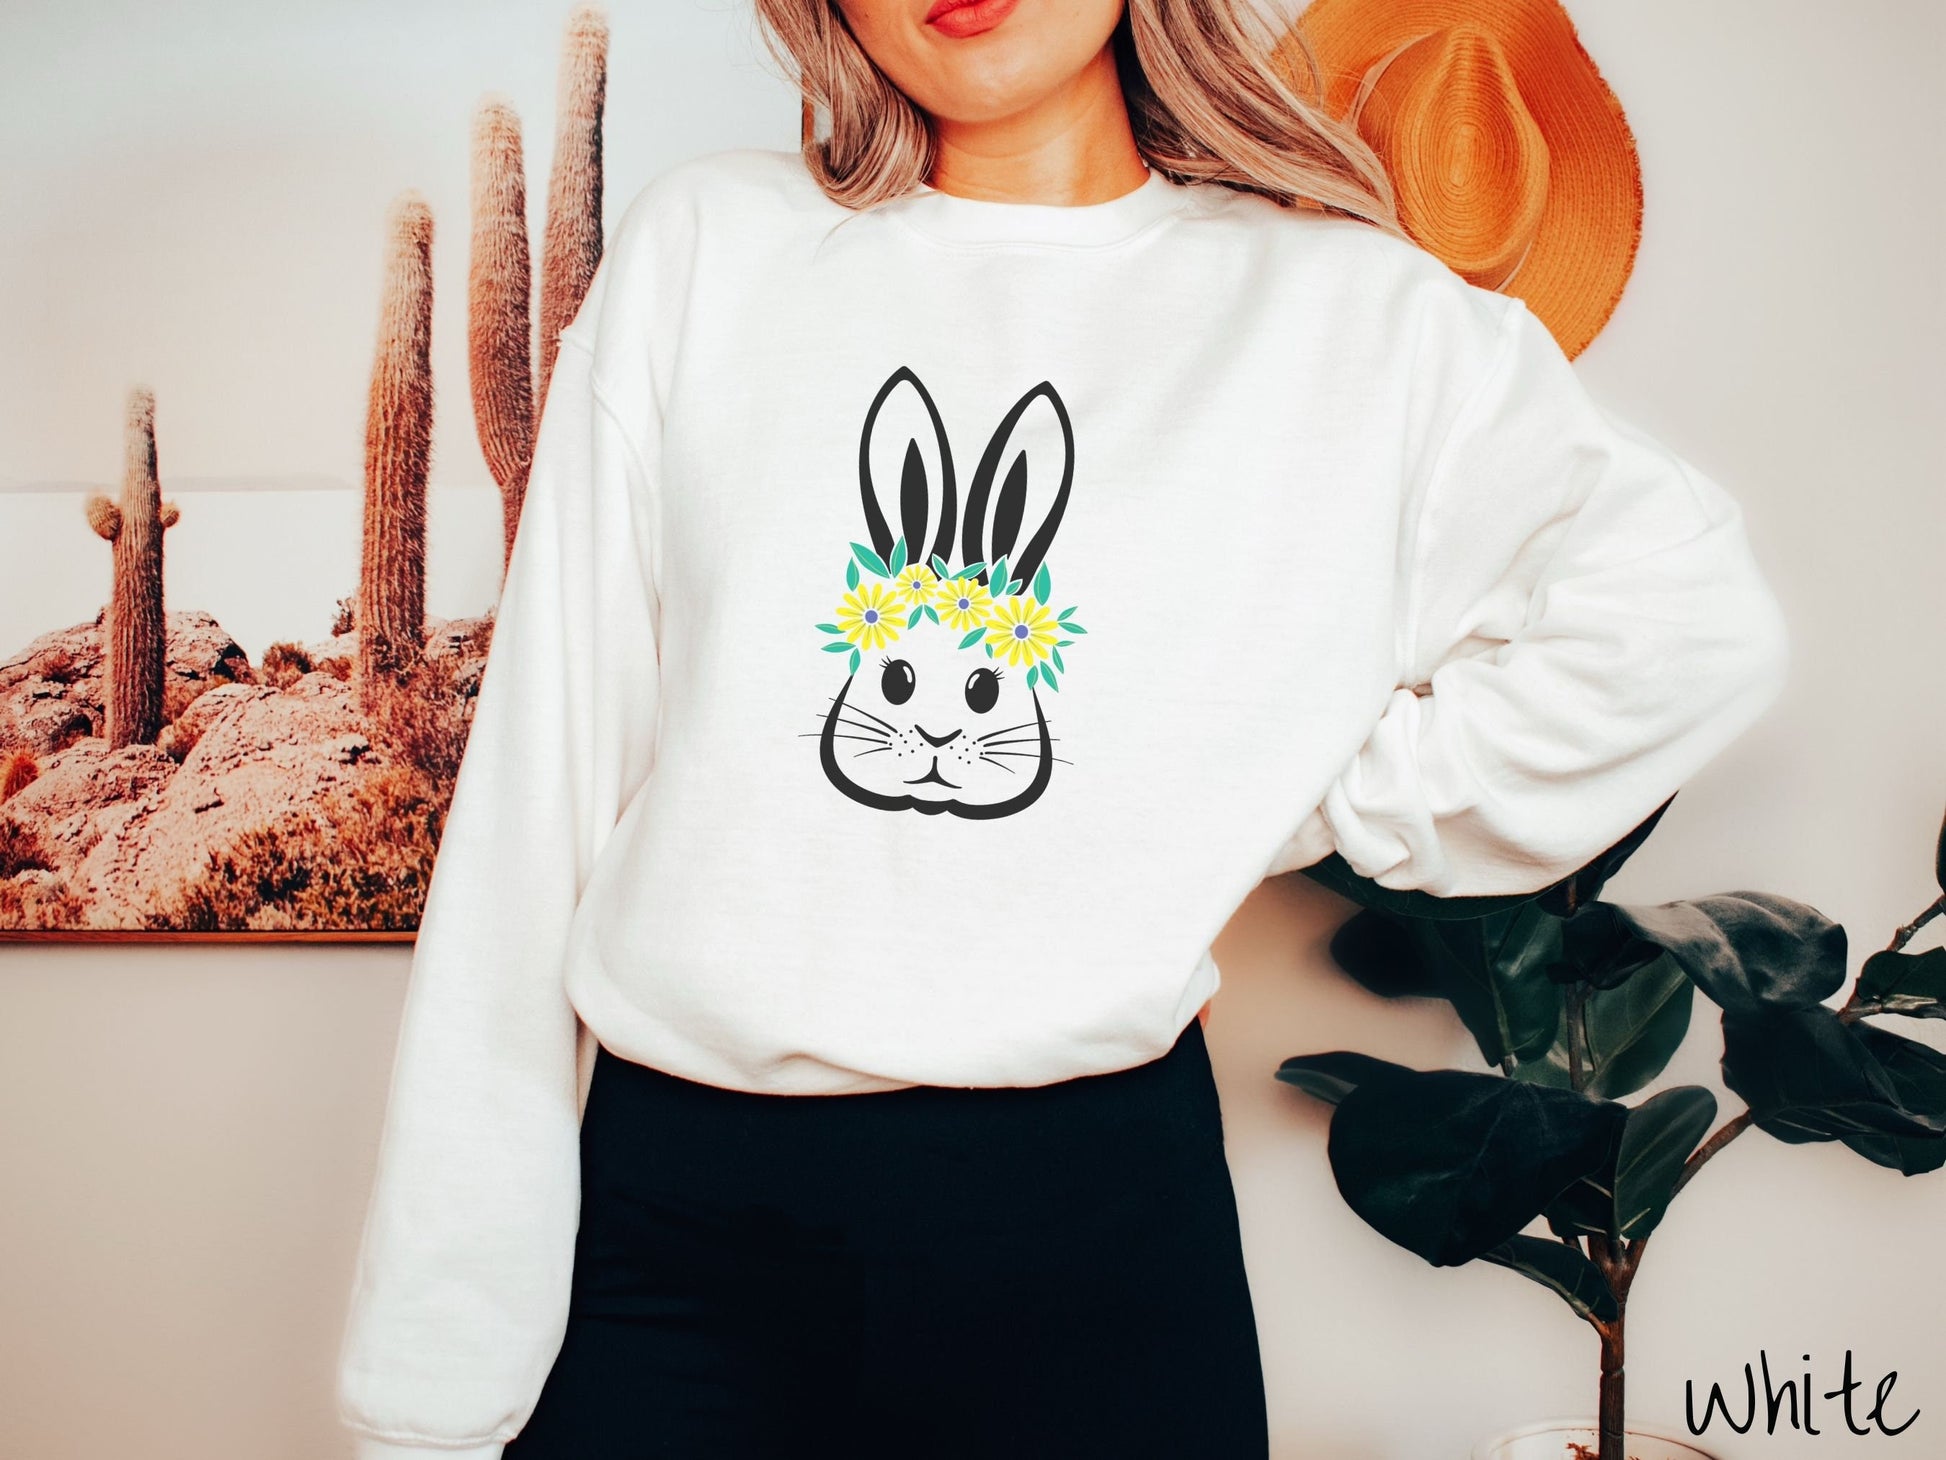 A woman wearing a cute, vintage white colored sweatshirt with a black outline of a bunny rabbit with eyelashes and whiskers that has a yellow and purple flower headband resting below its large ears.